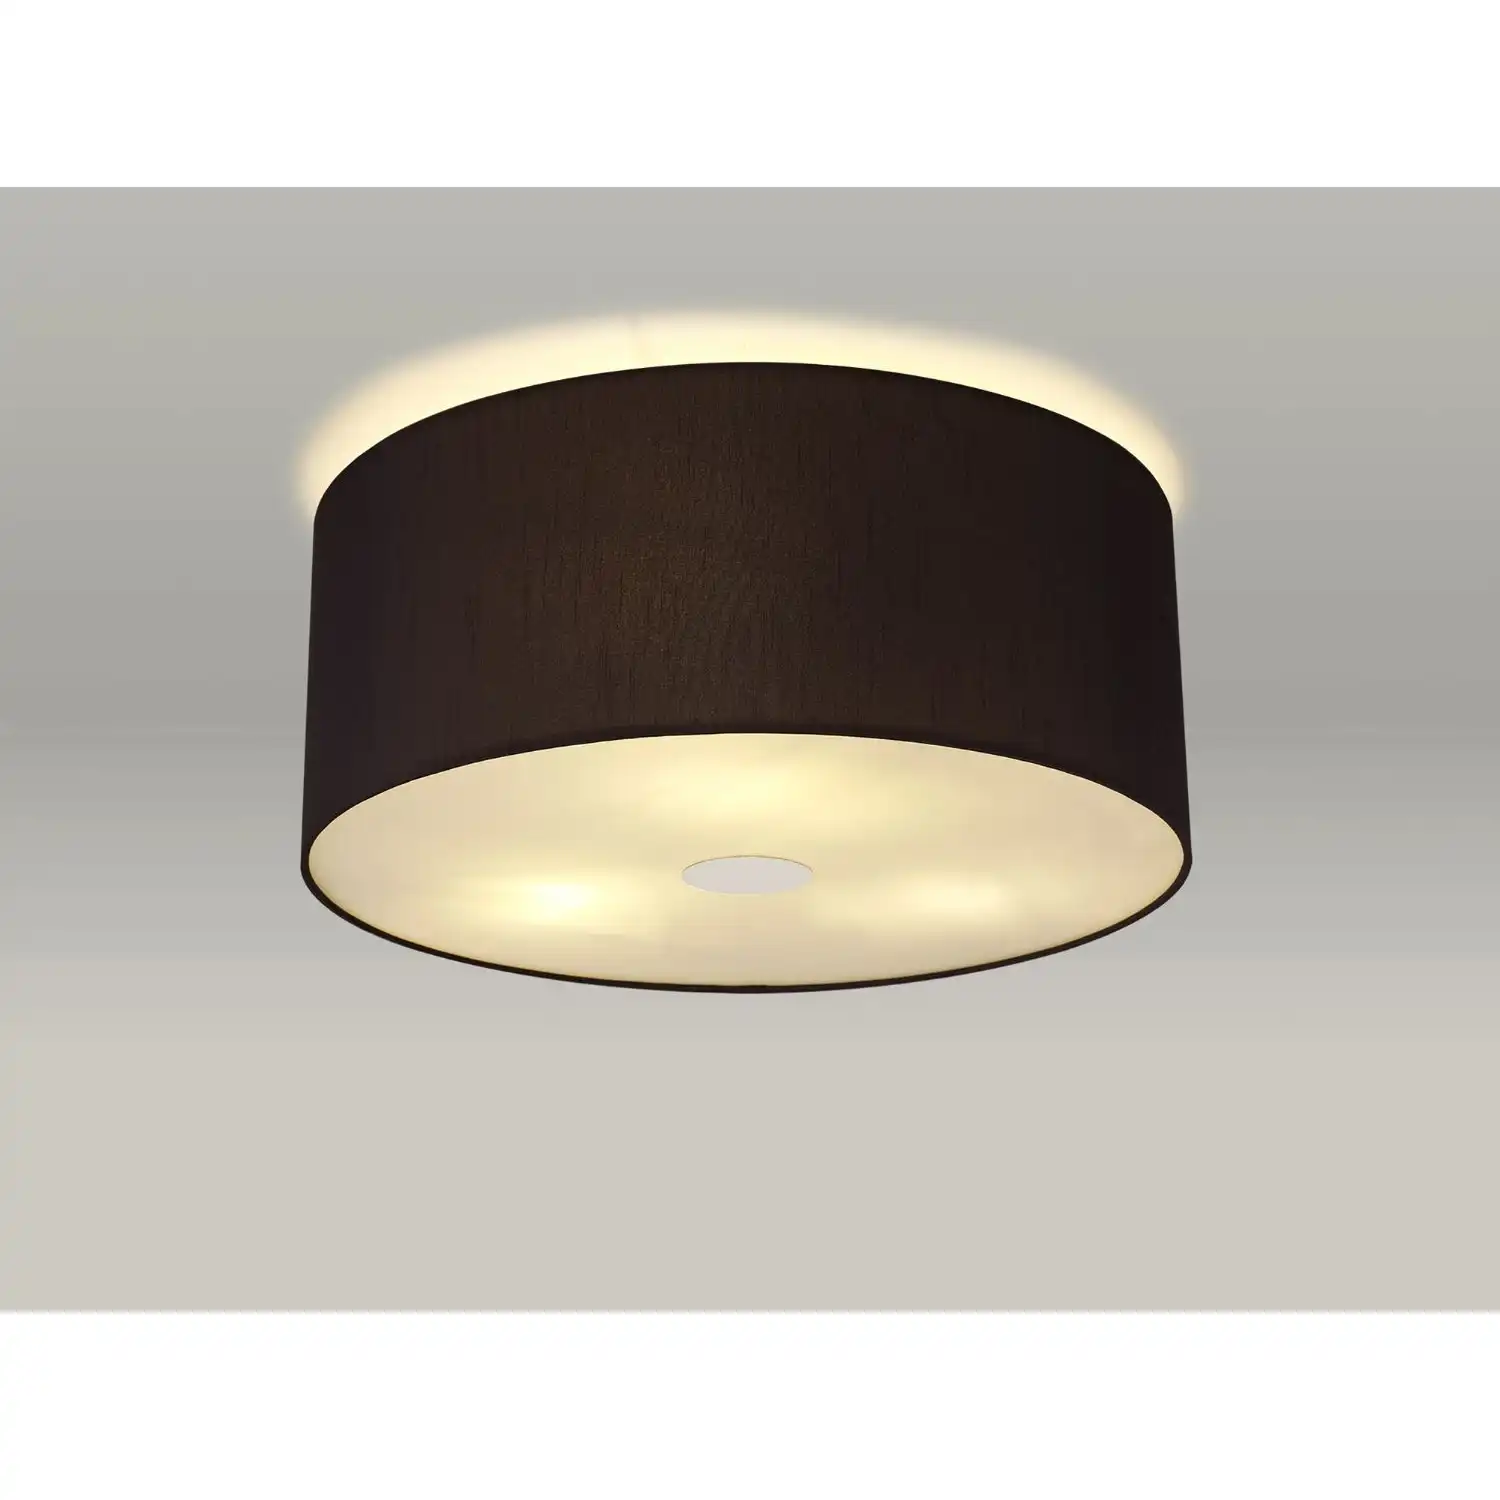 Baymont Polished Chrome 3 Light E27 Drop Flush Ceiling c w 500 Faux Silk Fabric Shade, Black White Laminate And 500mm Frosted PC Acrylic Diffuser